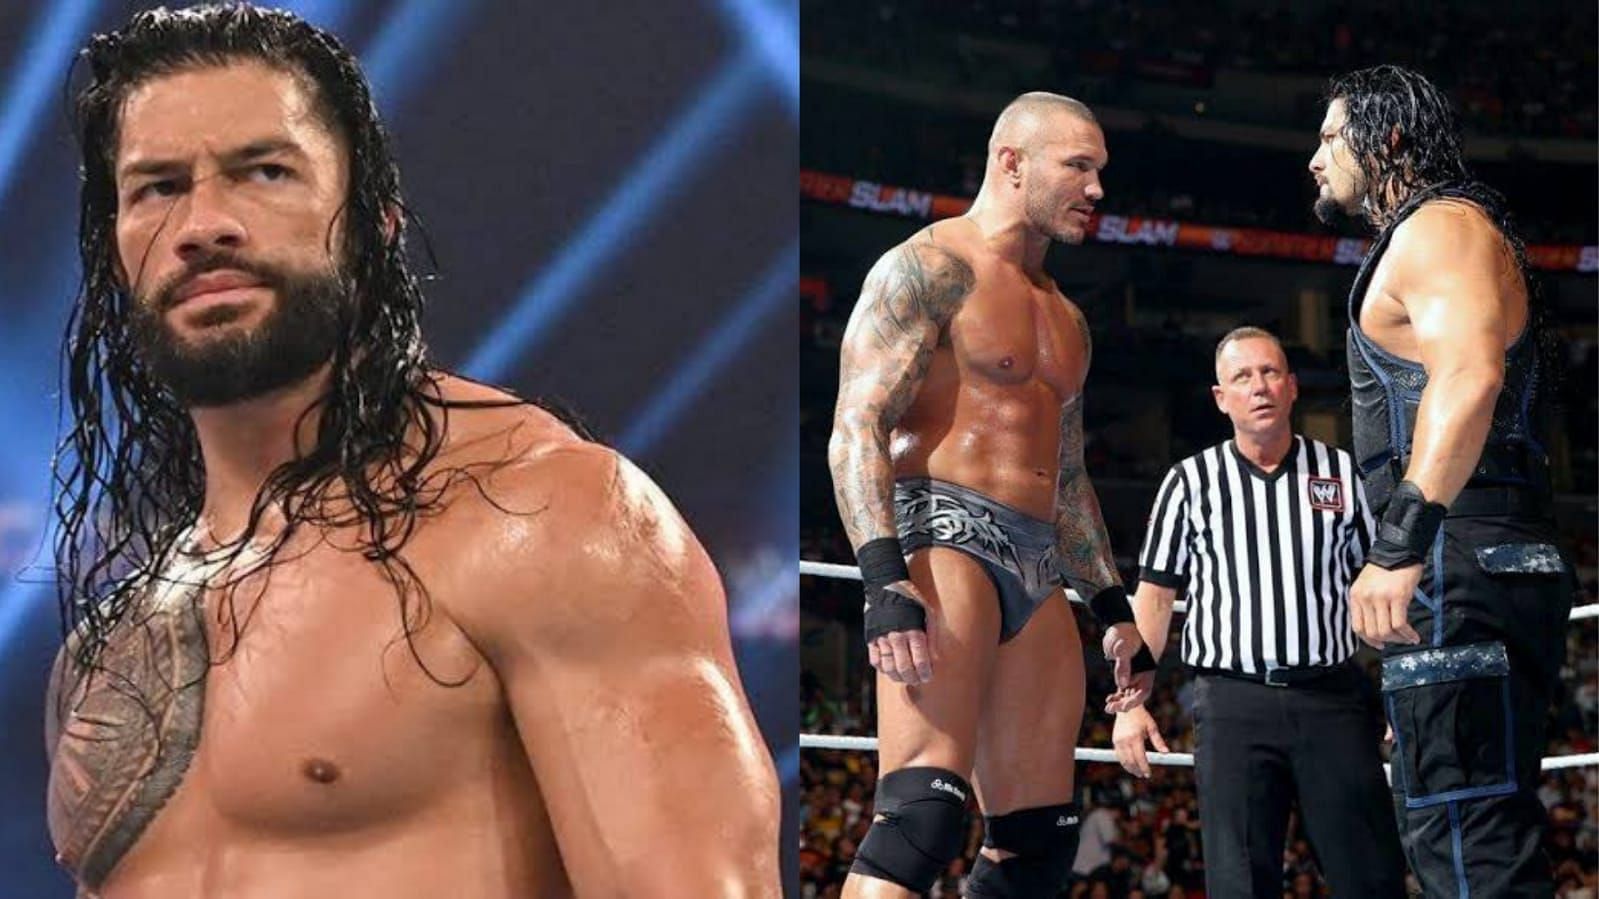 Wwe Raw Star Claims Roman Reigns Rejected His Apology Letter Written By Randy Orton 